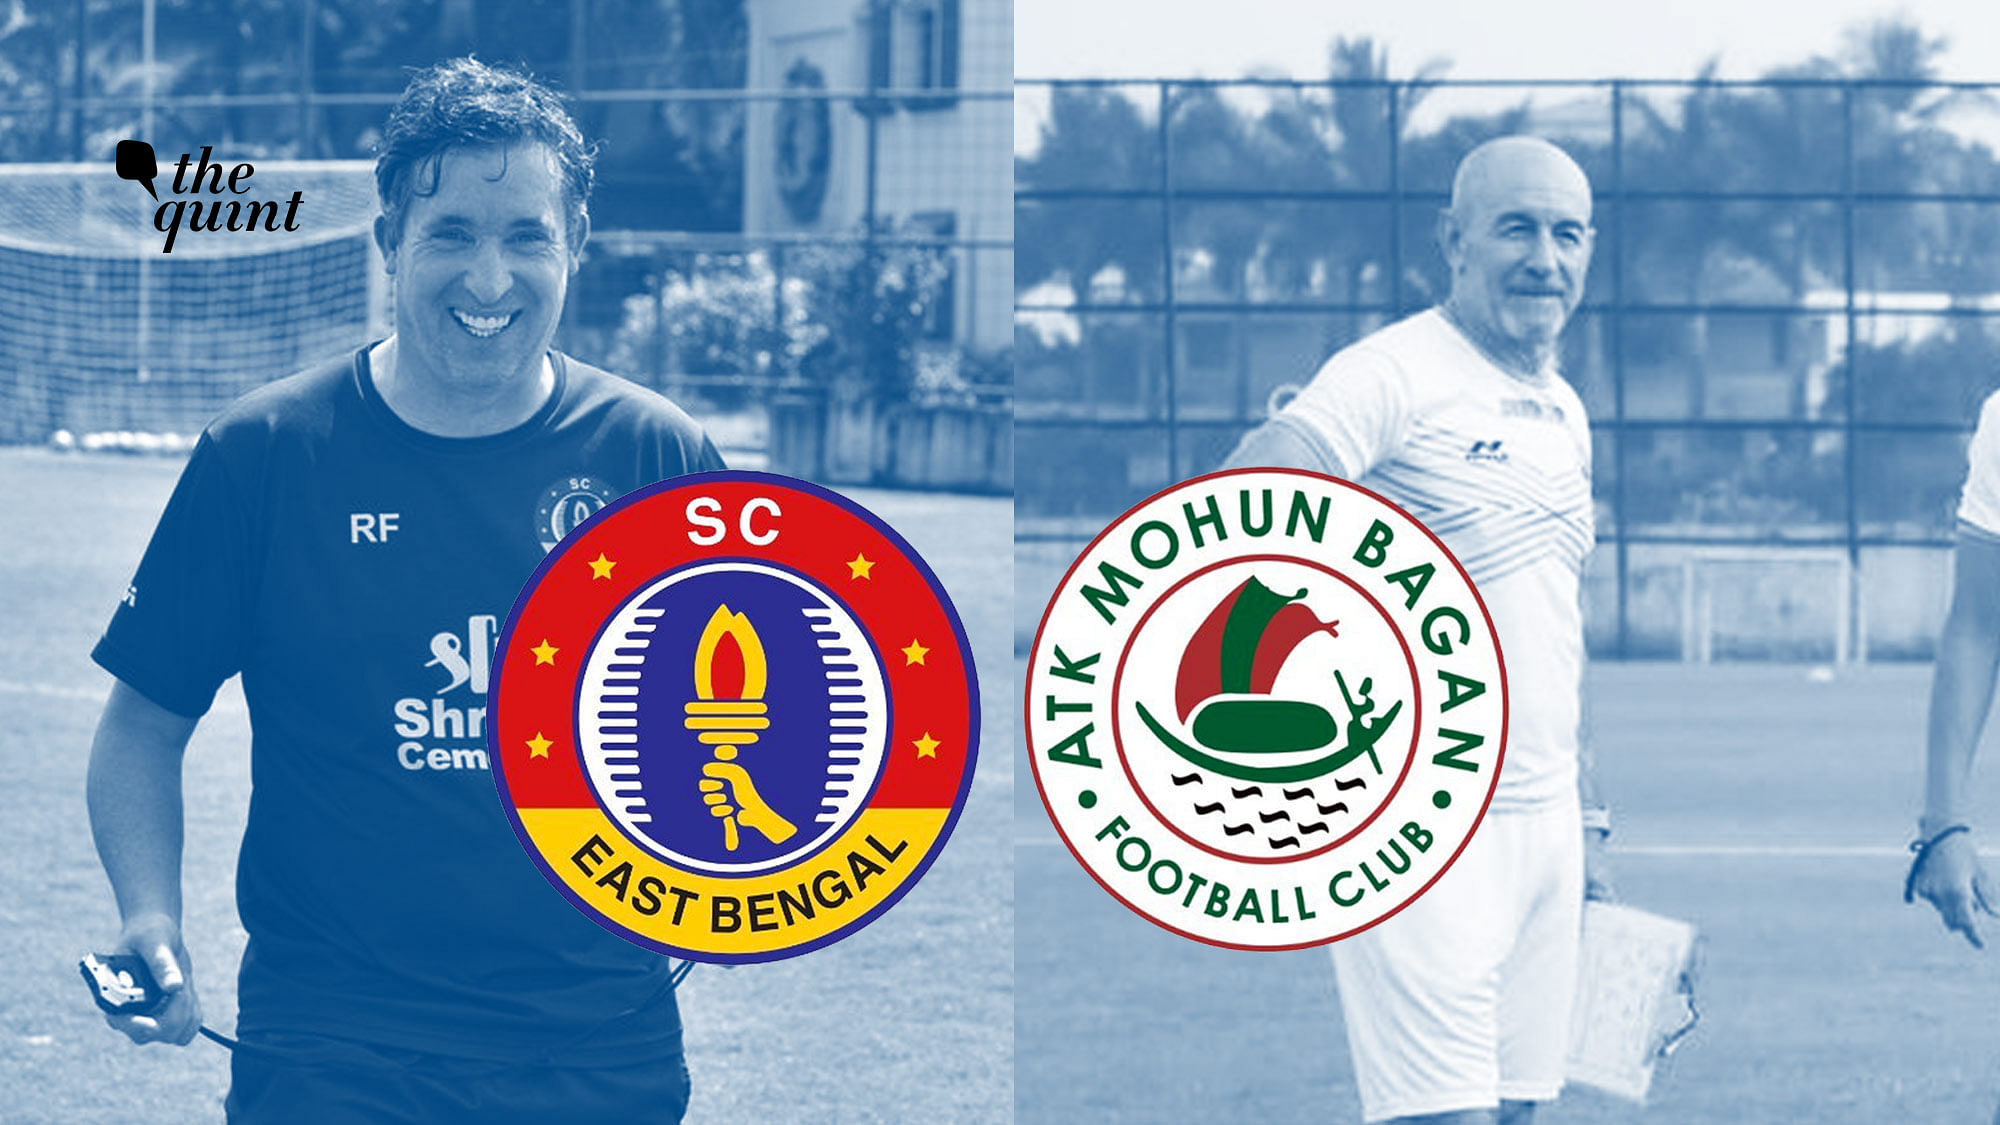 East Bengal are the newest entrants to the ISL while ATK and Mohun Bagan merged to form ATK MB from this season onwards.